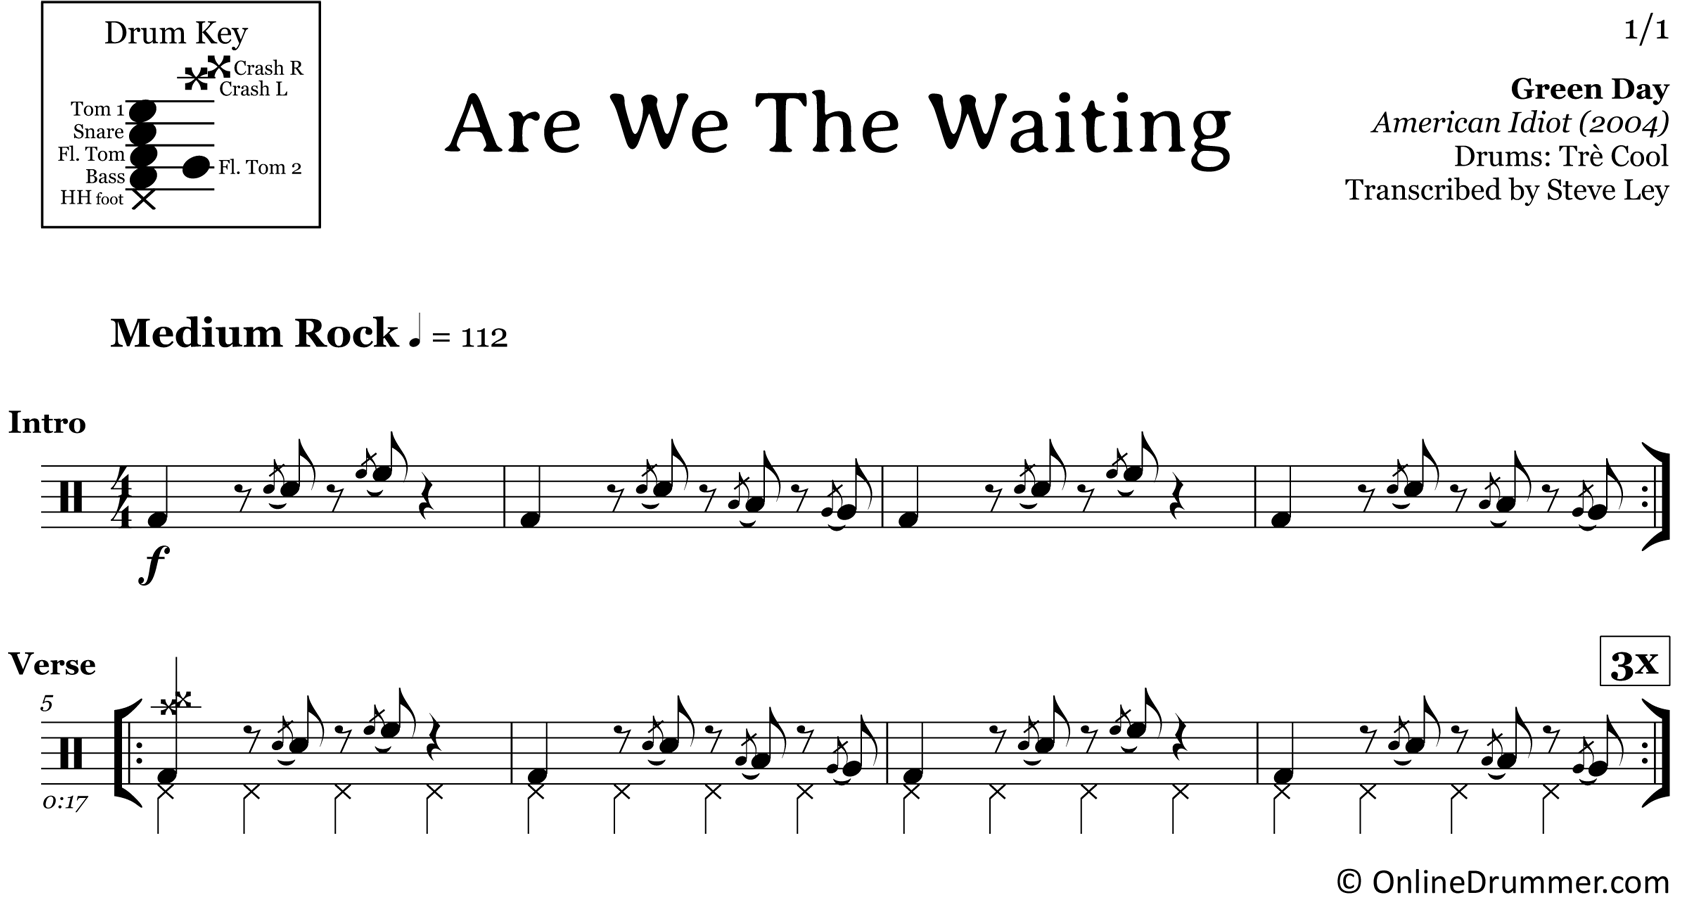 Are We The Waiting - Green Day - Drum Sheet Music